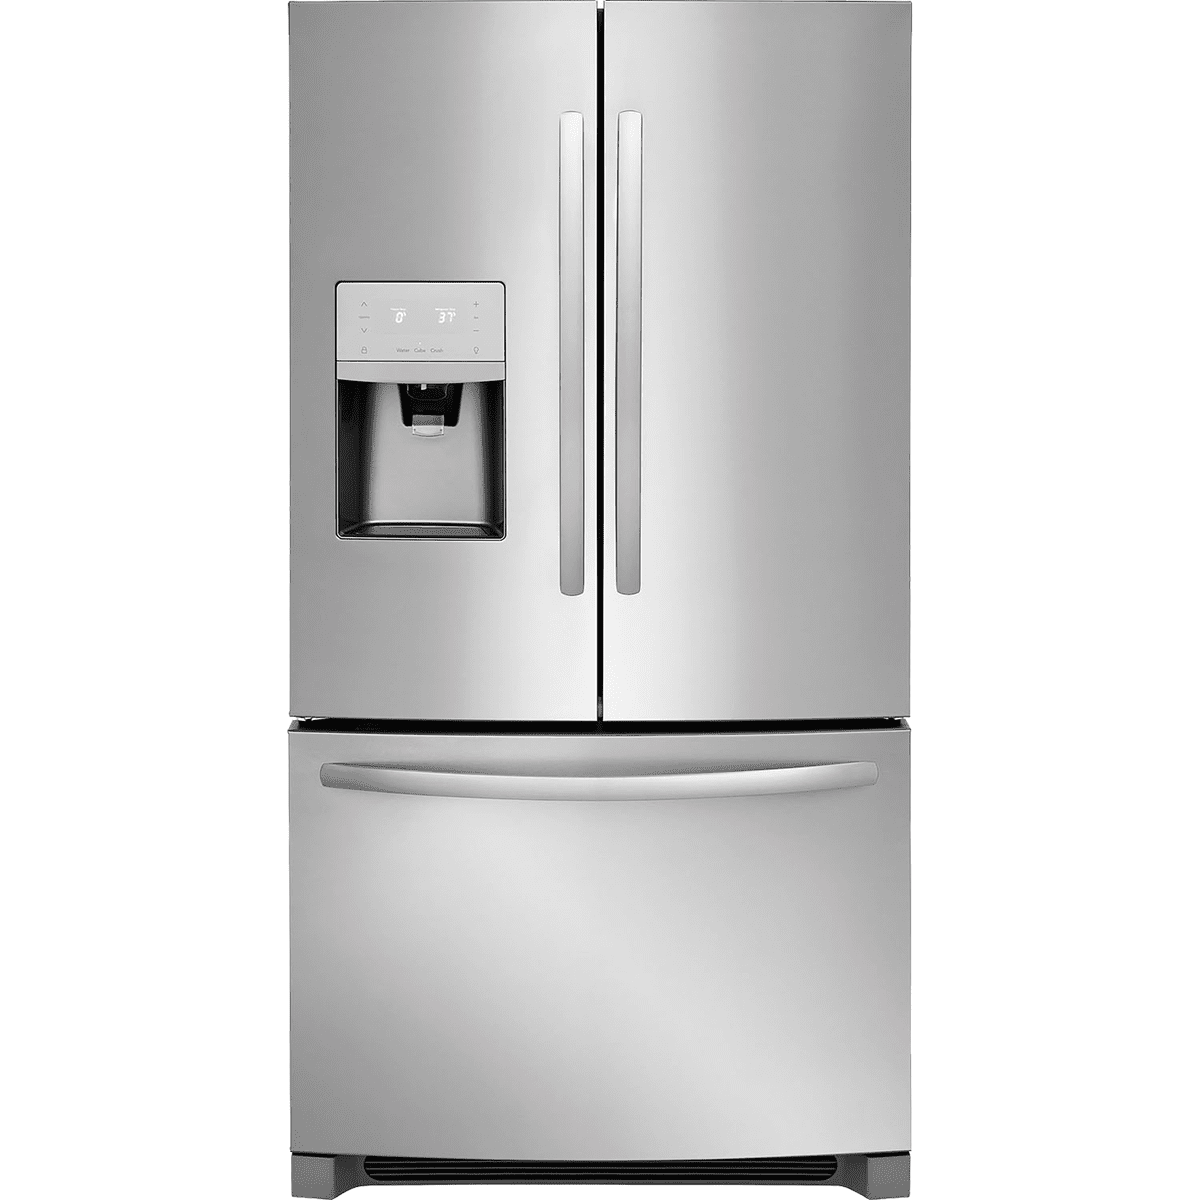 Frigidaire 26.8 Cu. Ft. Energy Star French Door Refrigerator - Stainless Steel